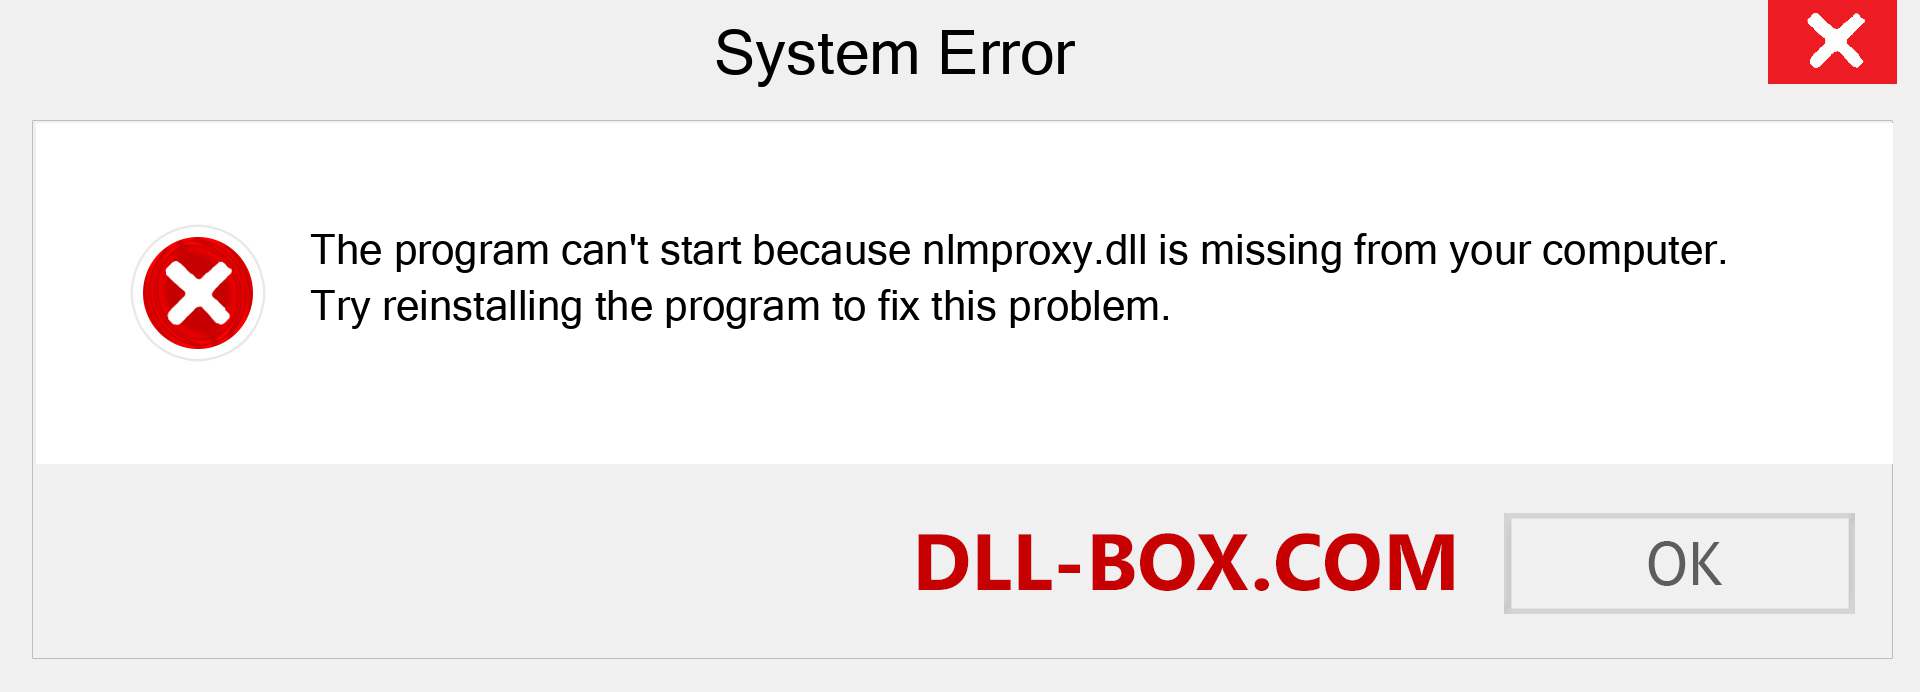  nlmproxy.dll file is missing?. Download for Windows 7, 8, 10 - Fix  nlmproxy dll Missing Error on Windows, photos, images